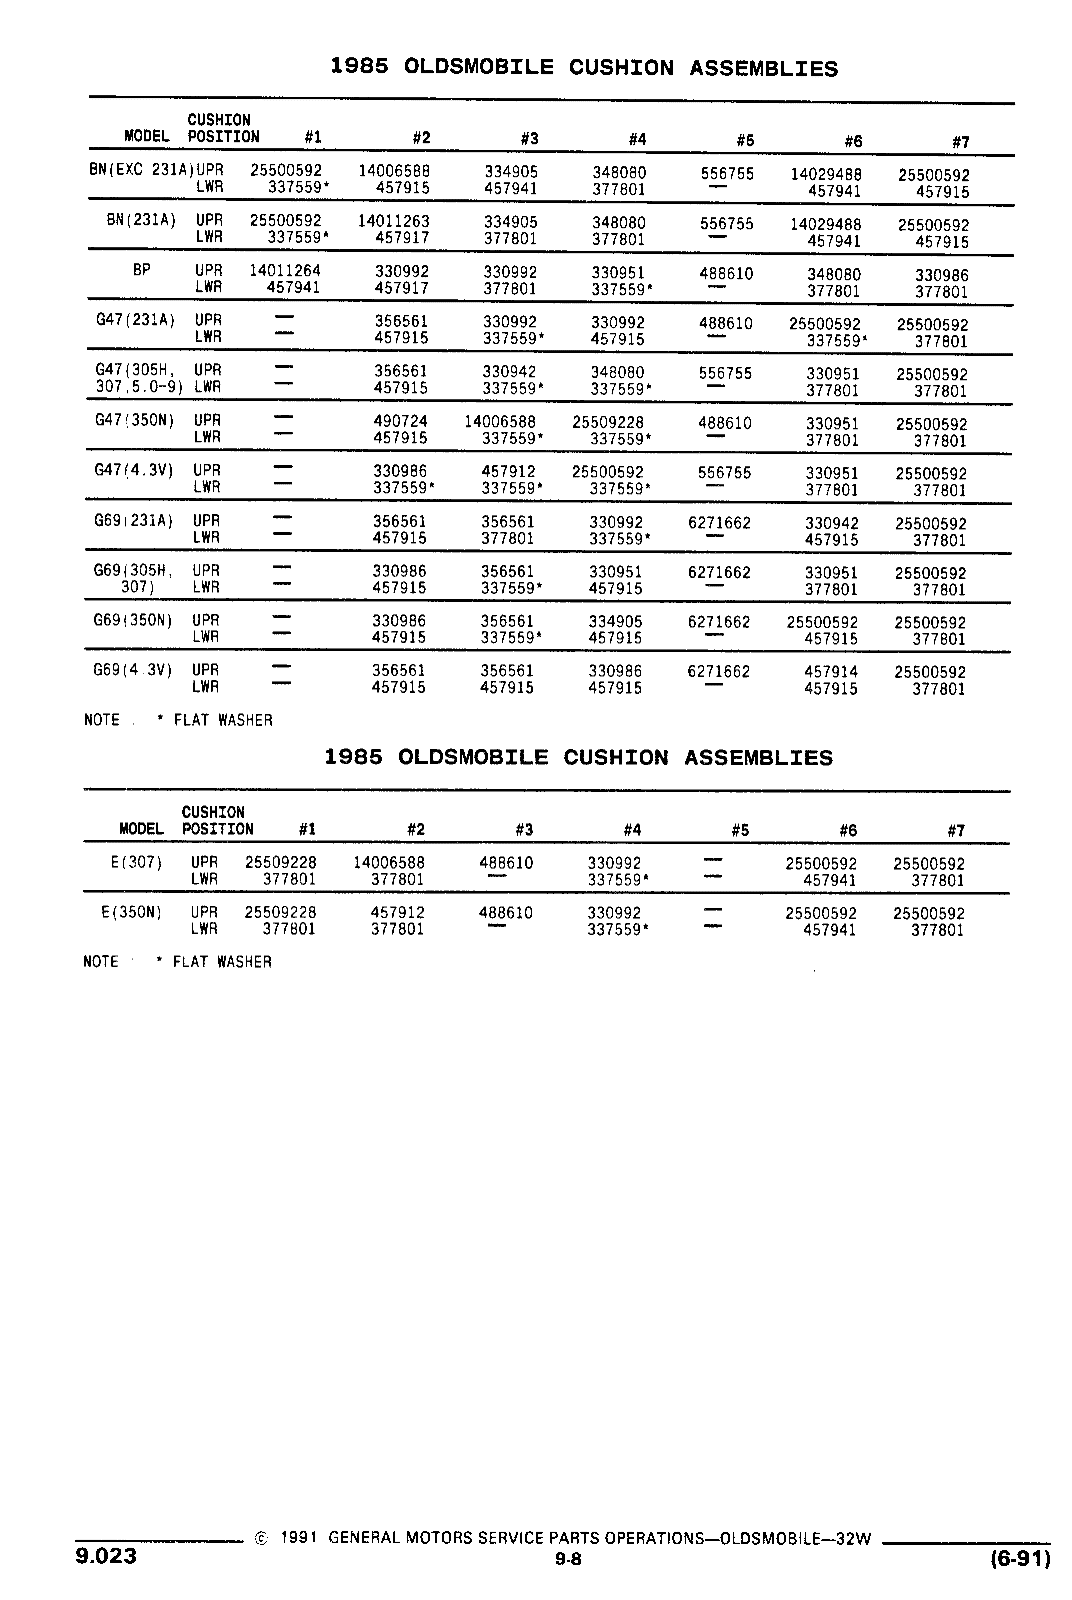 1985 G-body Olds Cushion Part Numbers.png